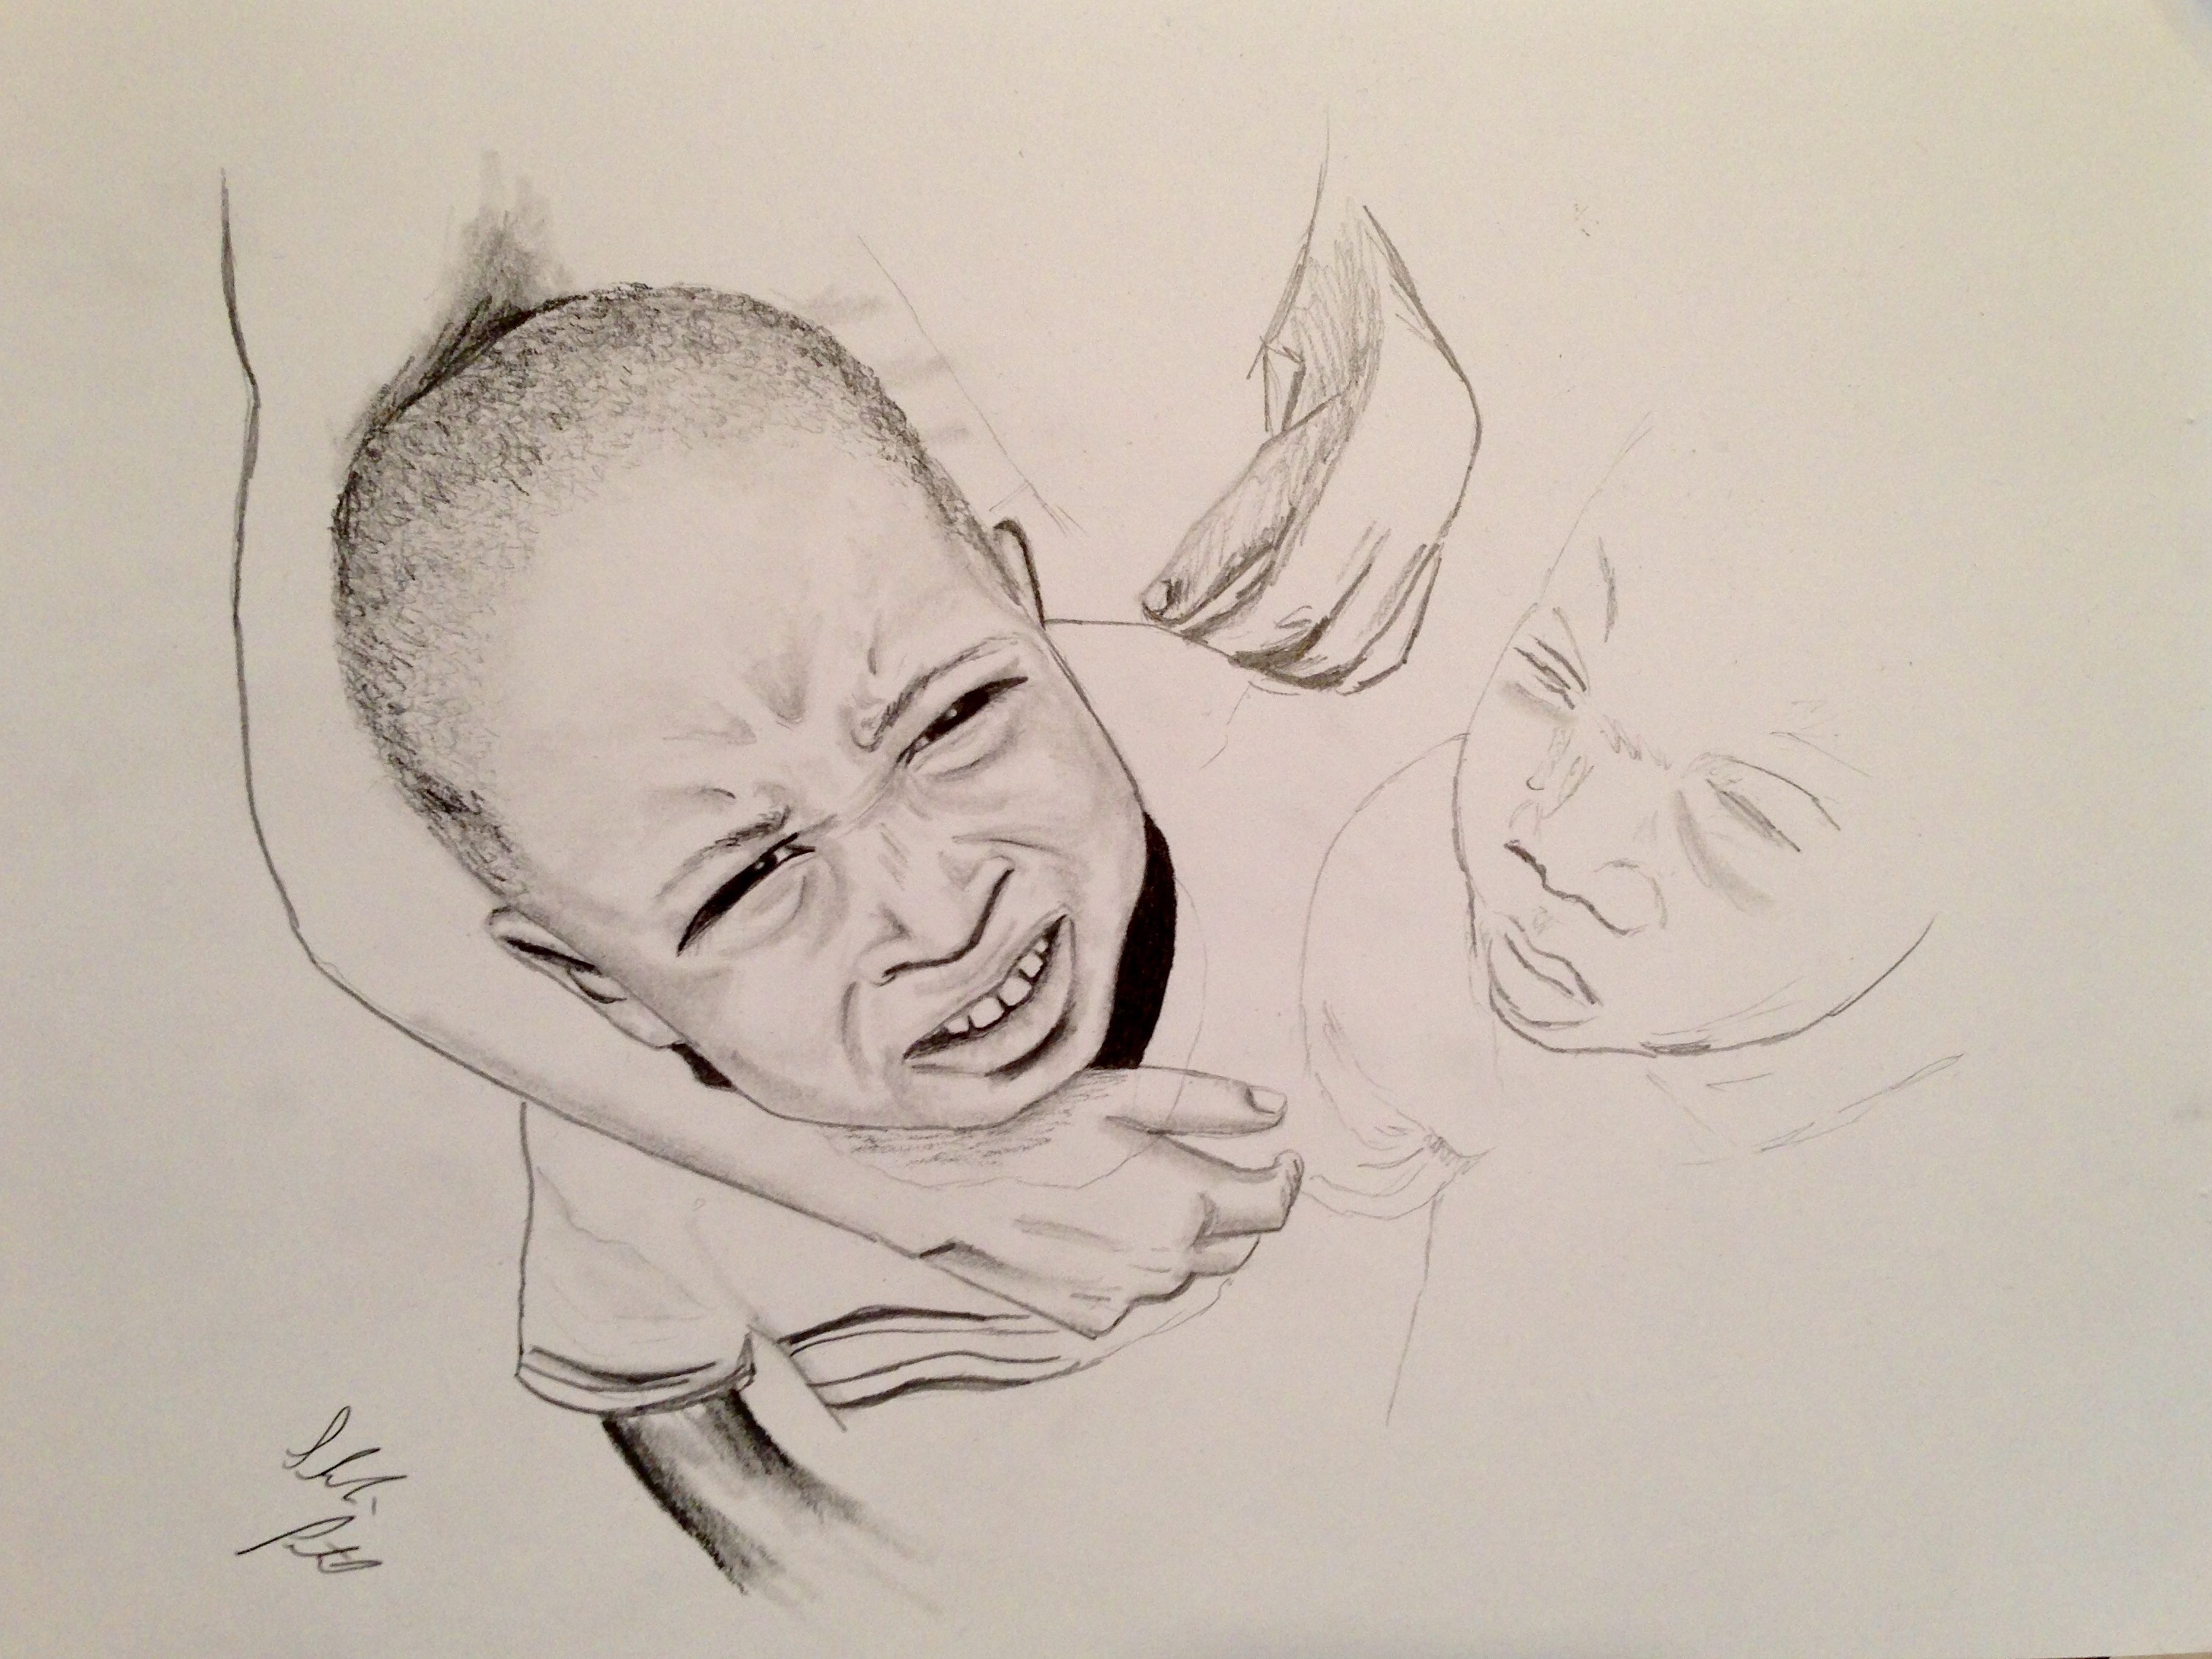 Drawing of child with another person's arm wrapped around his head